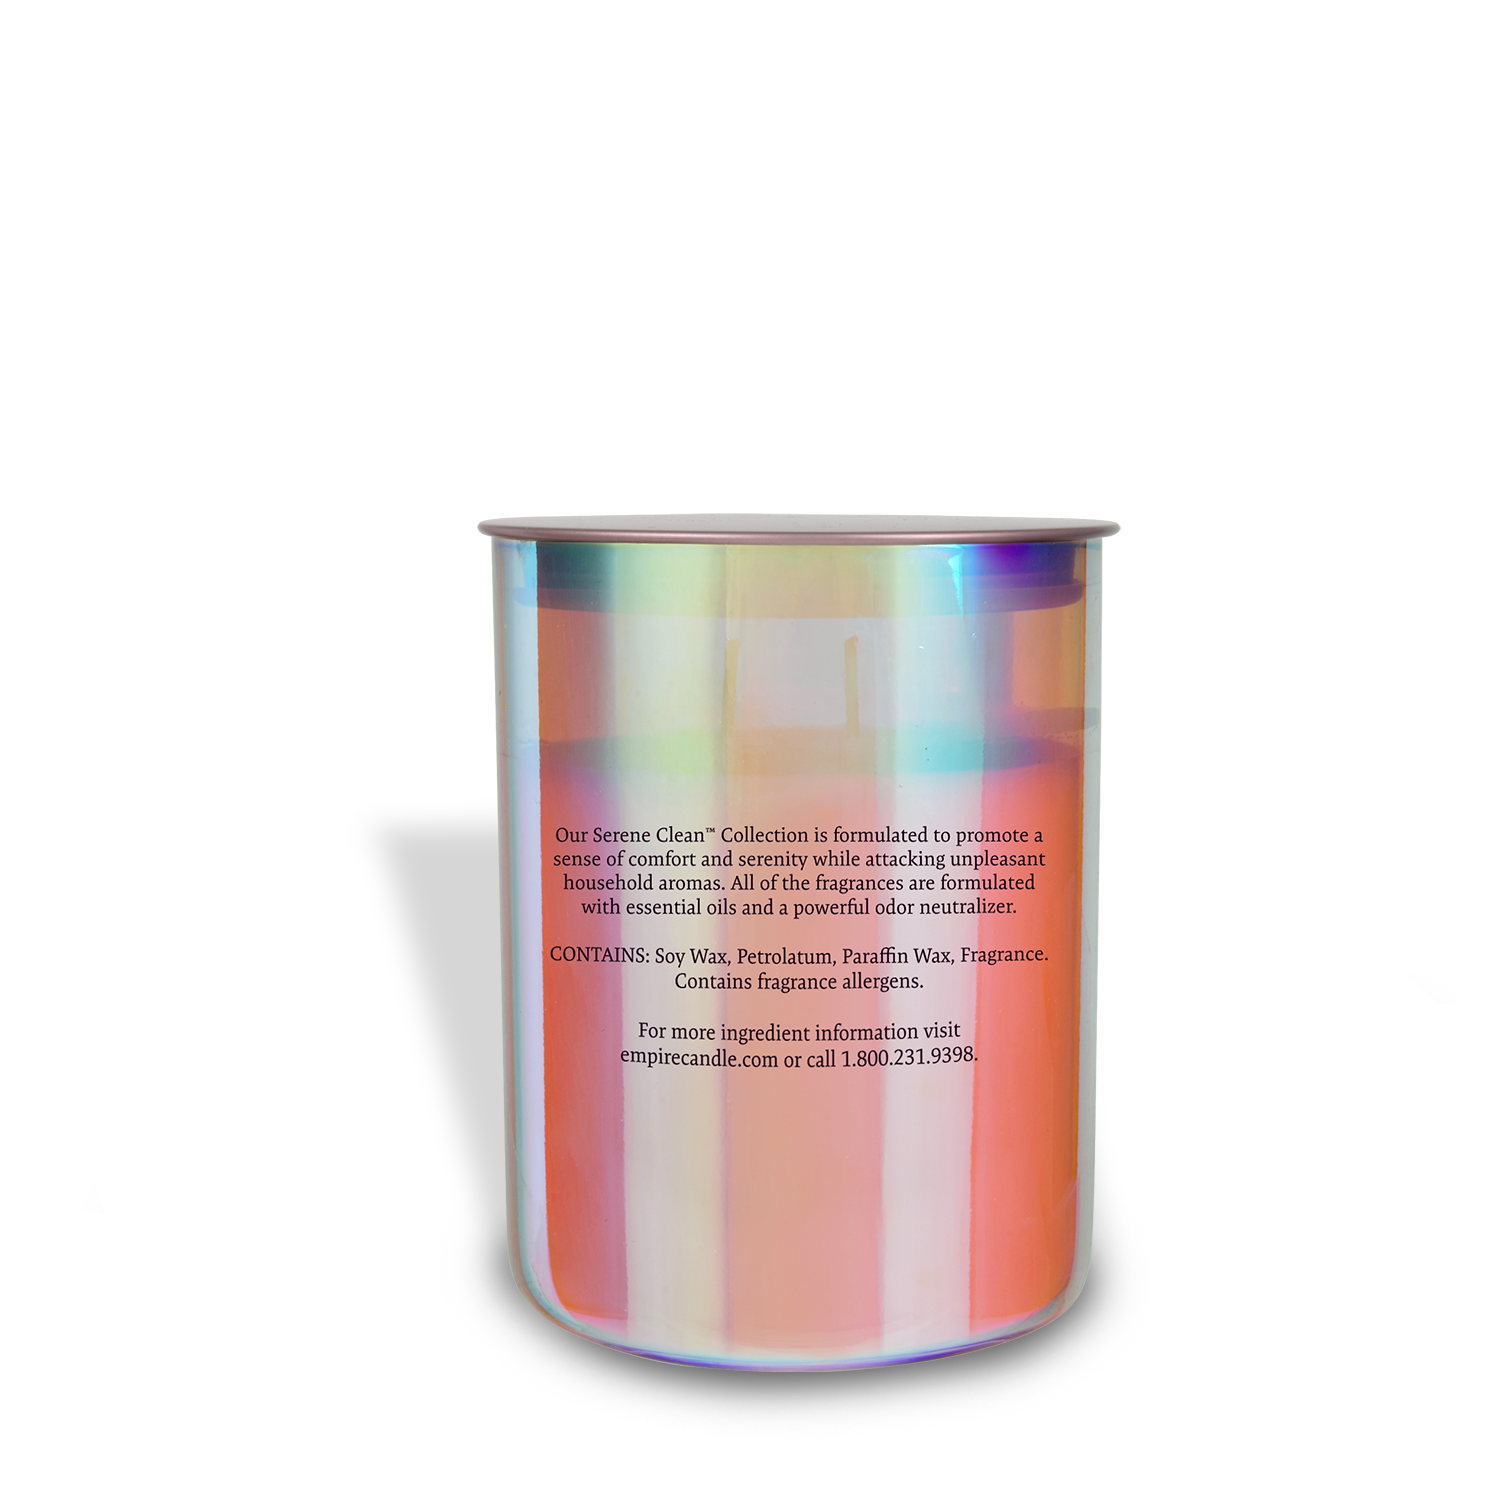 A tin container with an iridescent label on it, designed for a Beach Rose Scented Jar Candle (12 oz) from the Serene Clean Collection by Tuscany Candle® EVD.